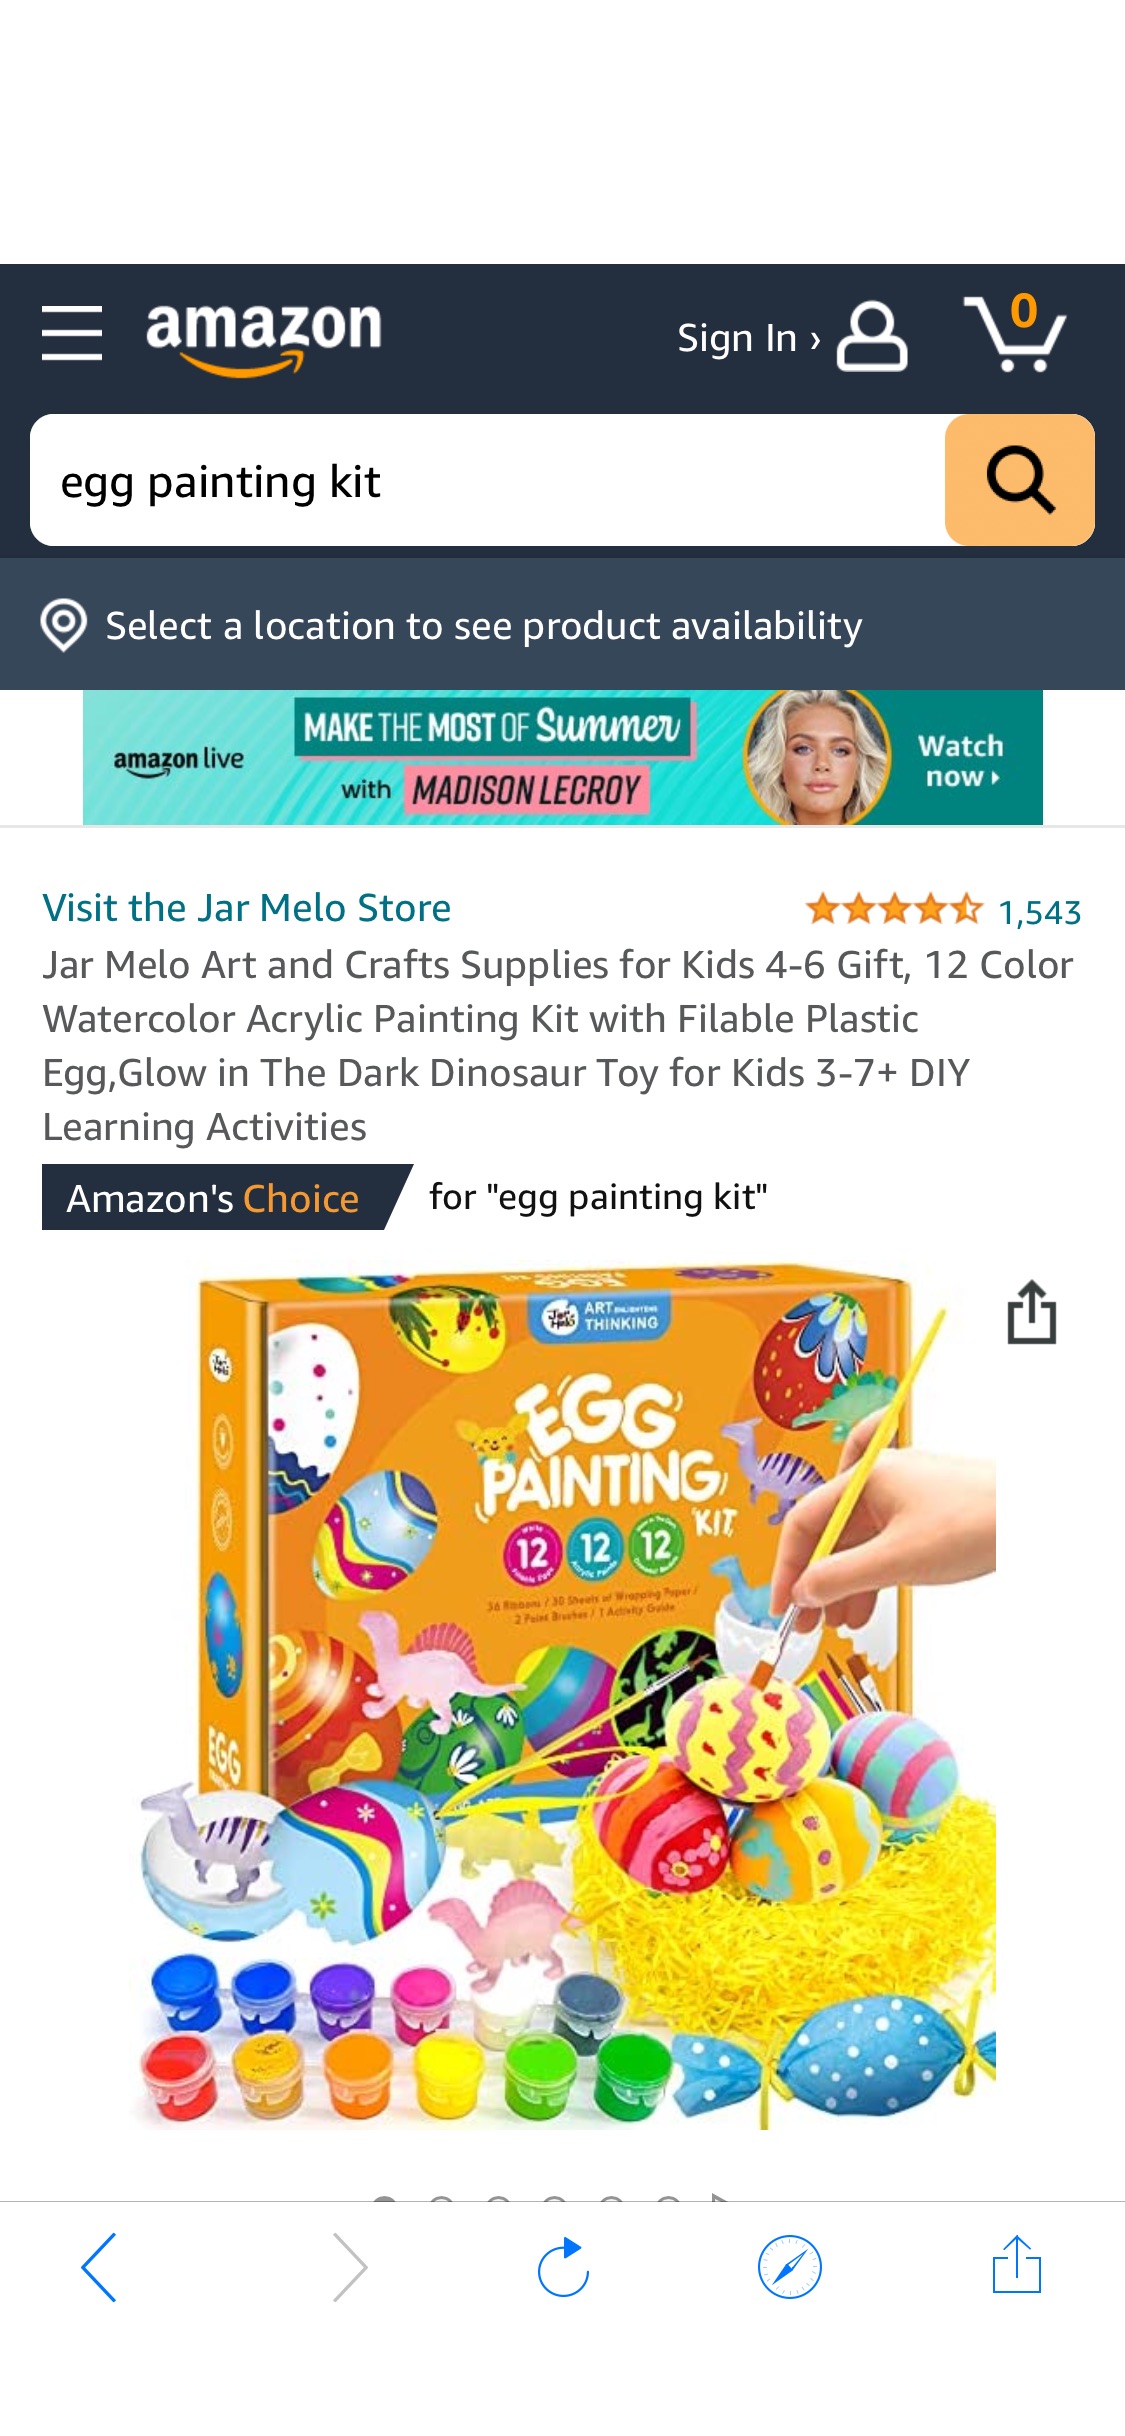 Amazon.com: Jar Melo Art and Crafts Supplies for Kids 4-6 Gift, 12 Color Watercolor Acrylic Painting Kit with Filable Plastic Egg,Glow in The Dark Dinosaur Toy for Kids 3-7+